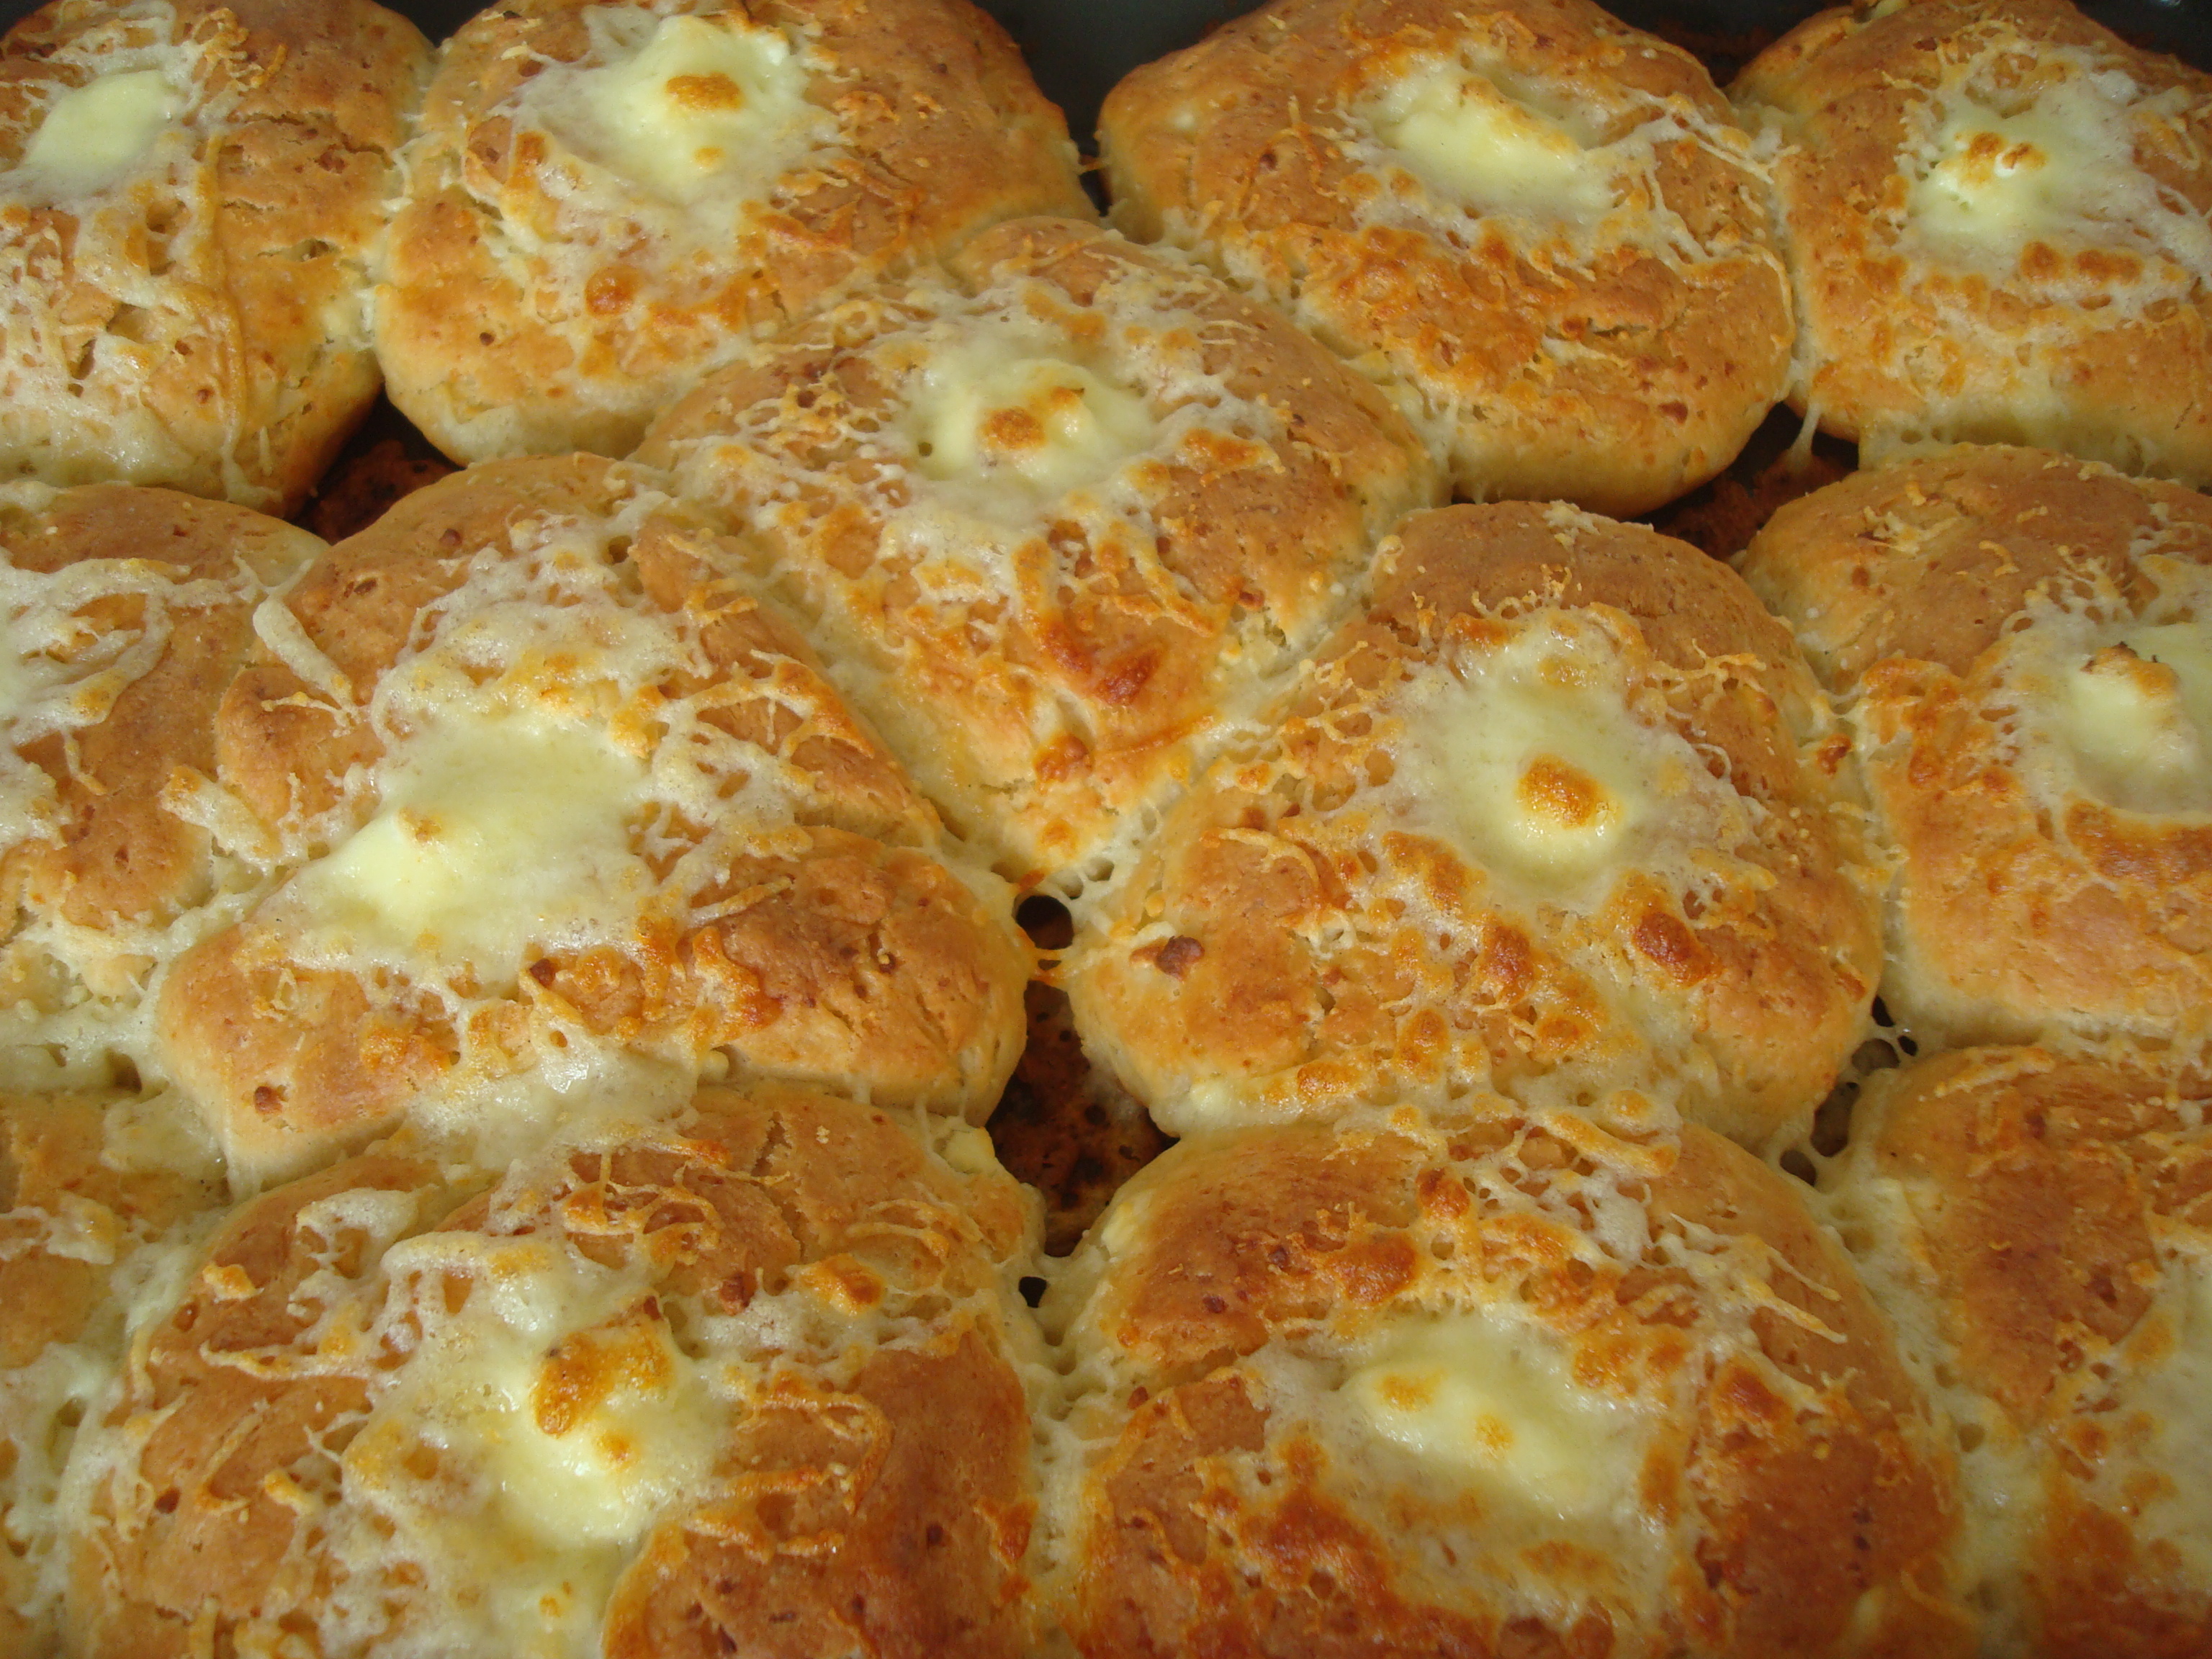 Home baked bread with cheese photo